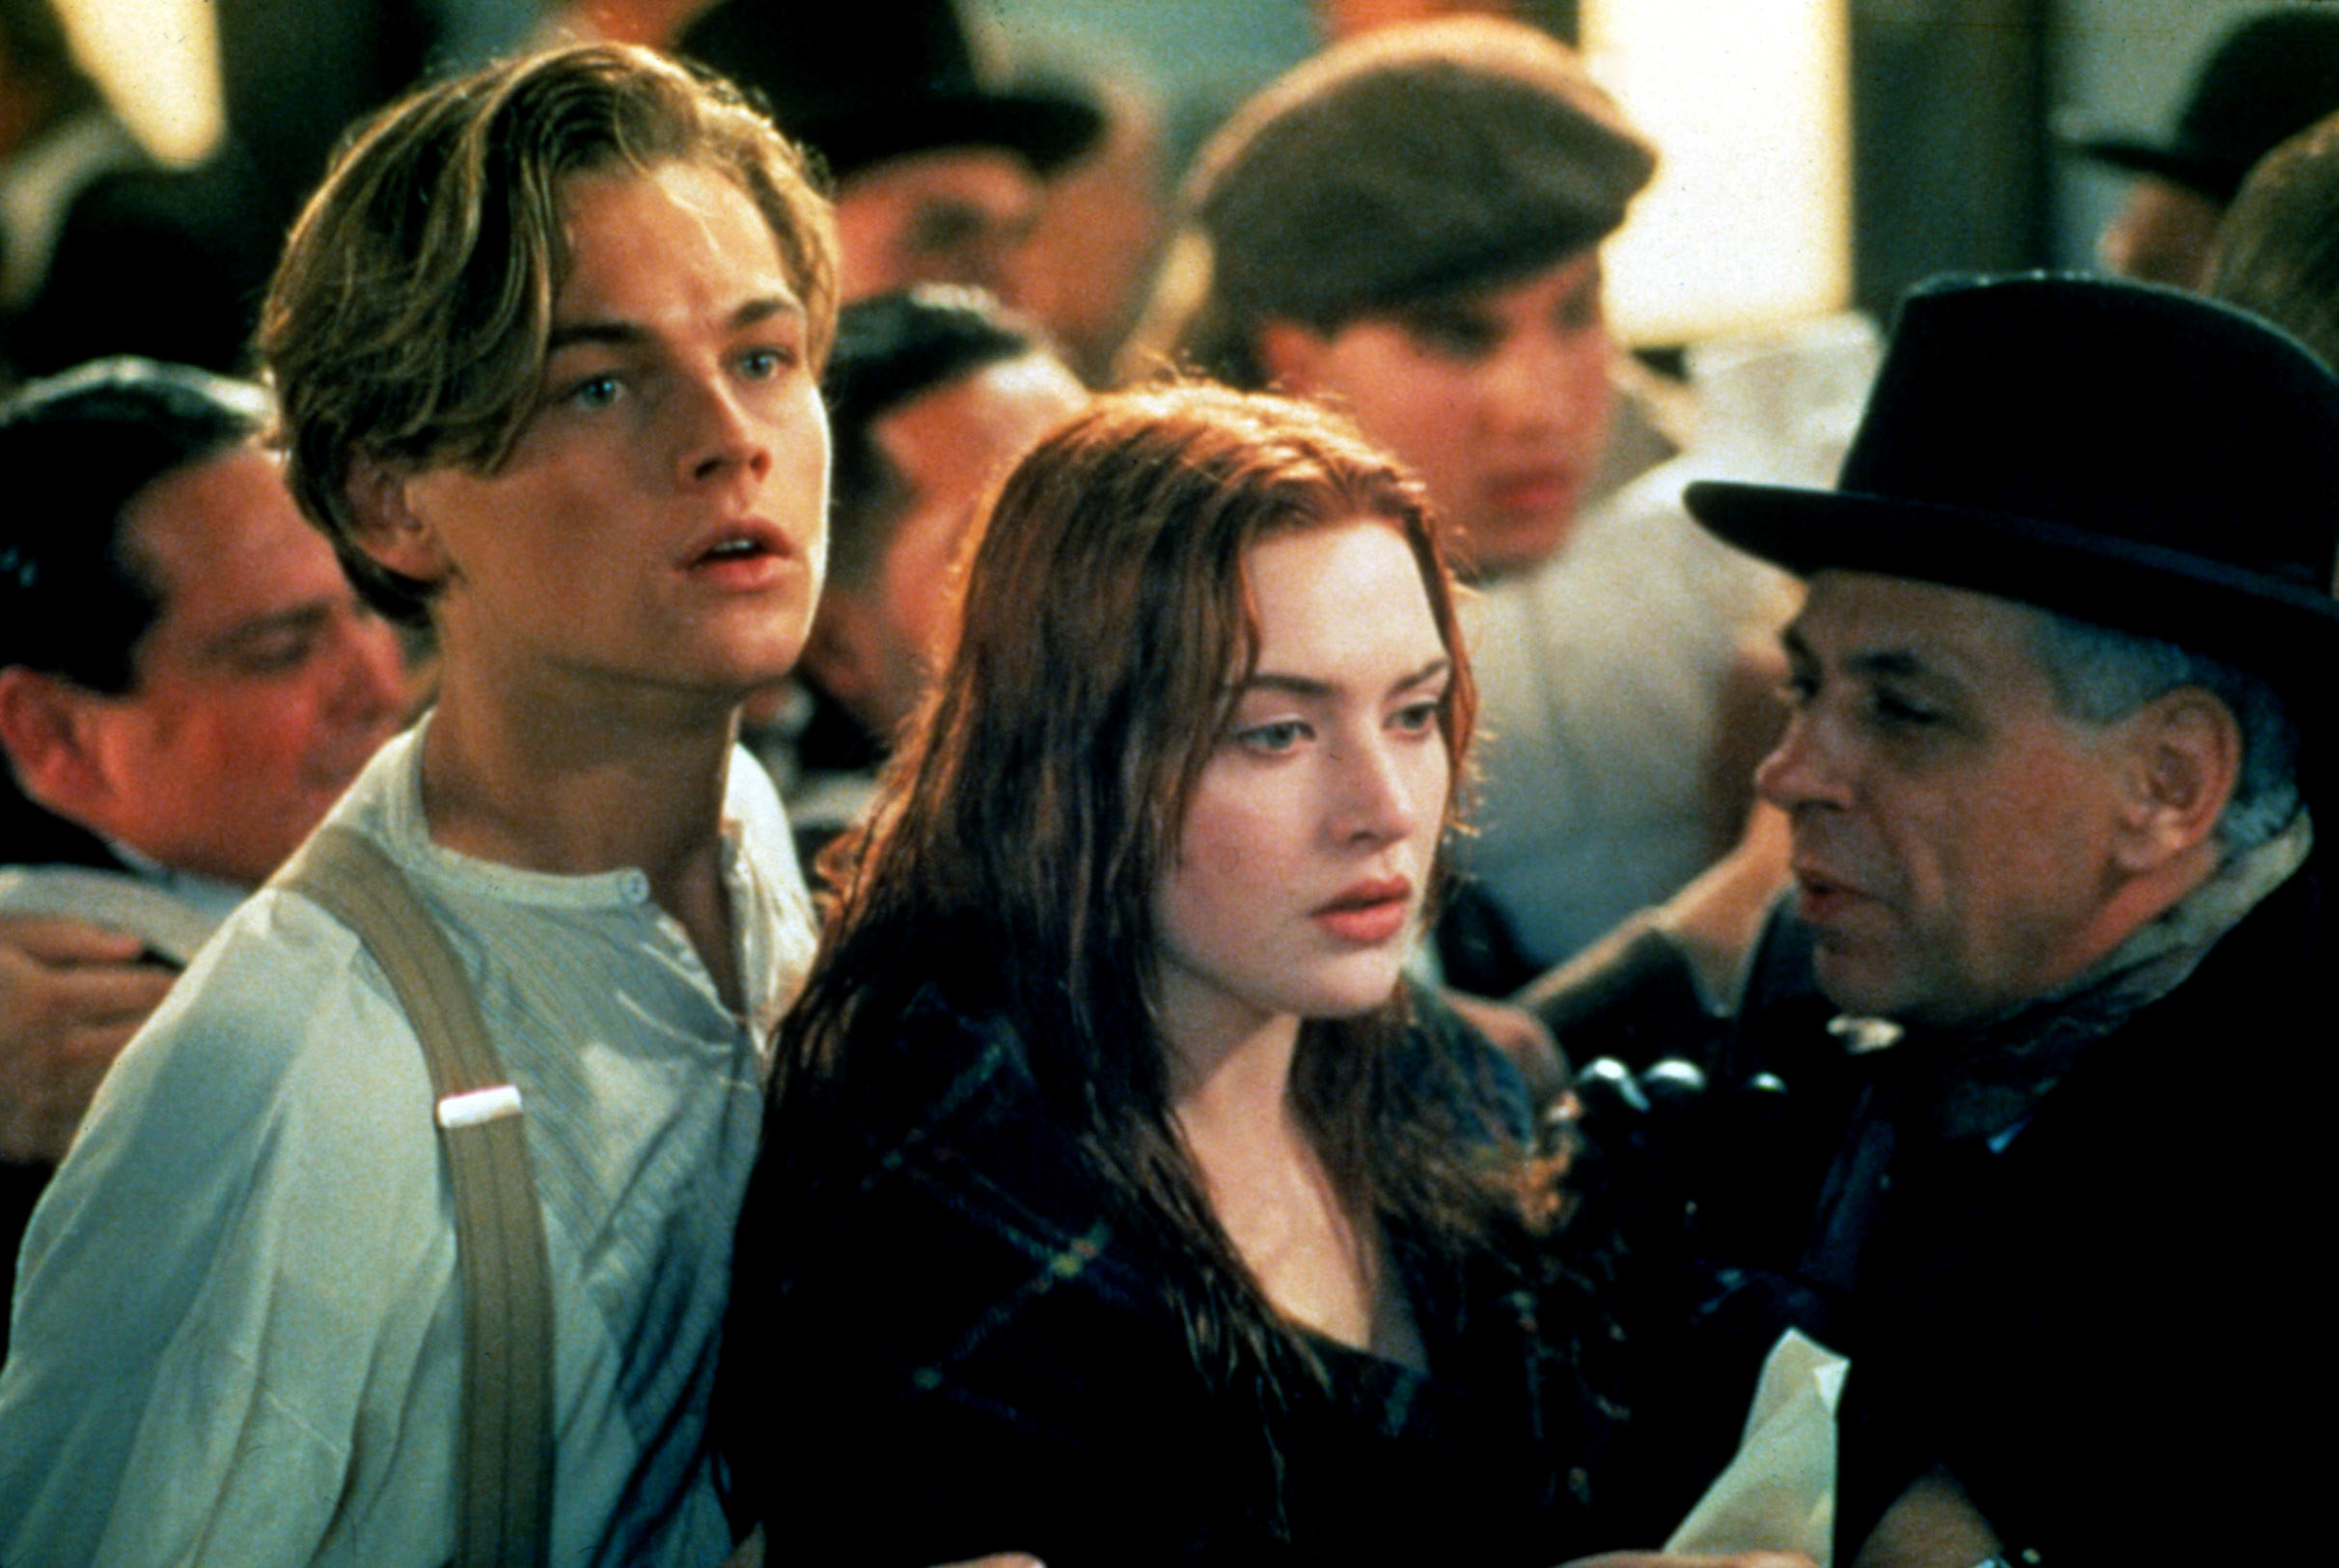 Leo and Kate in the film together